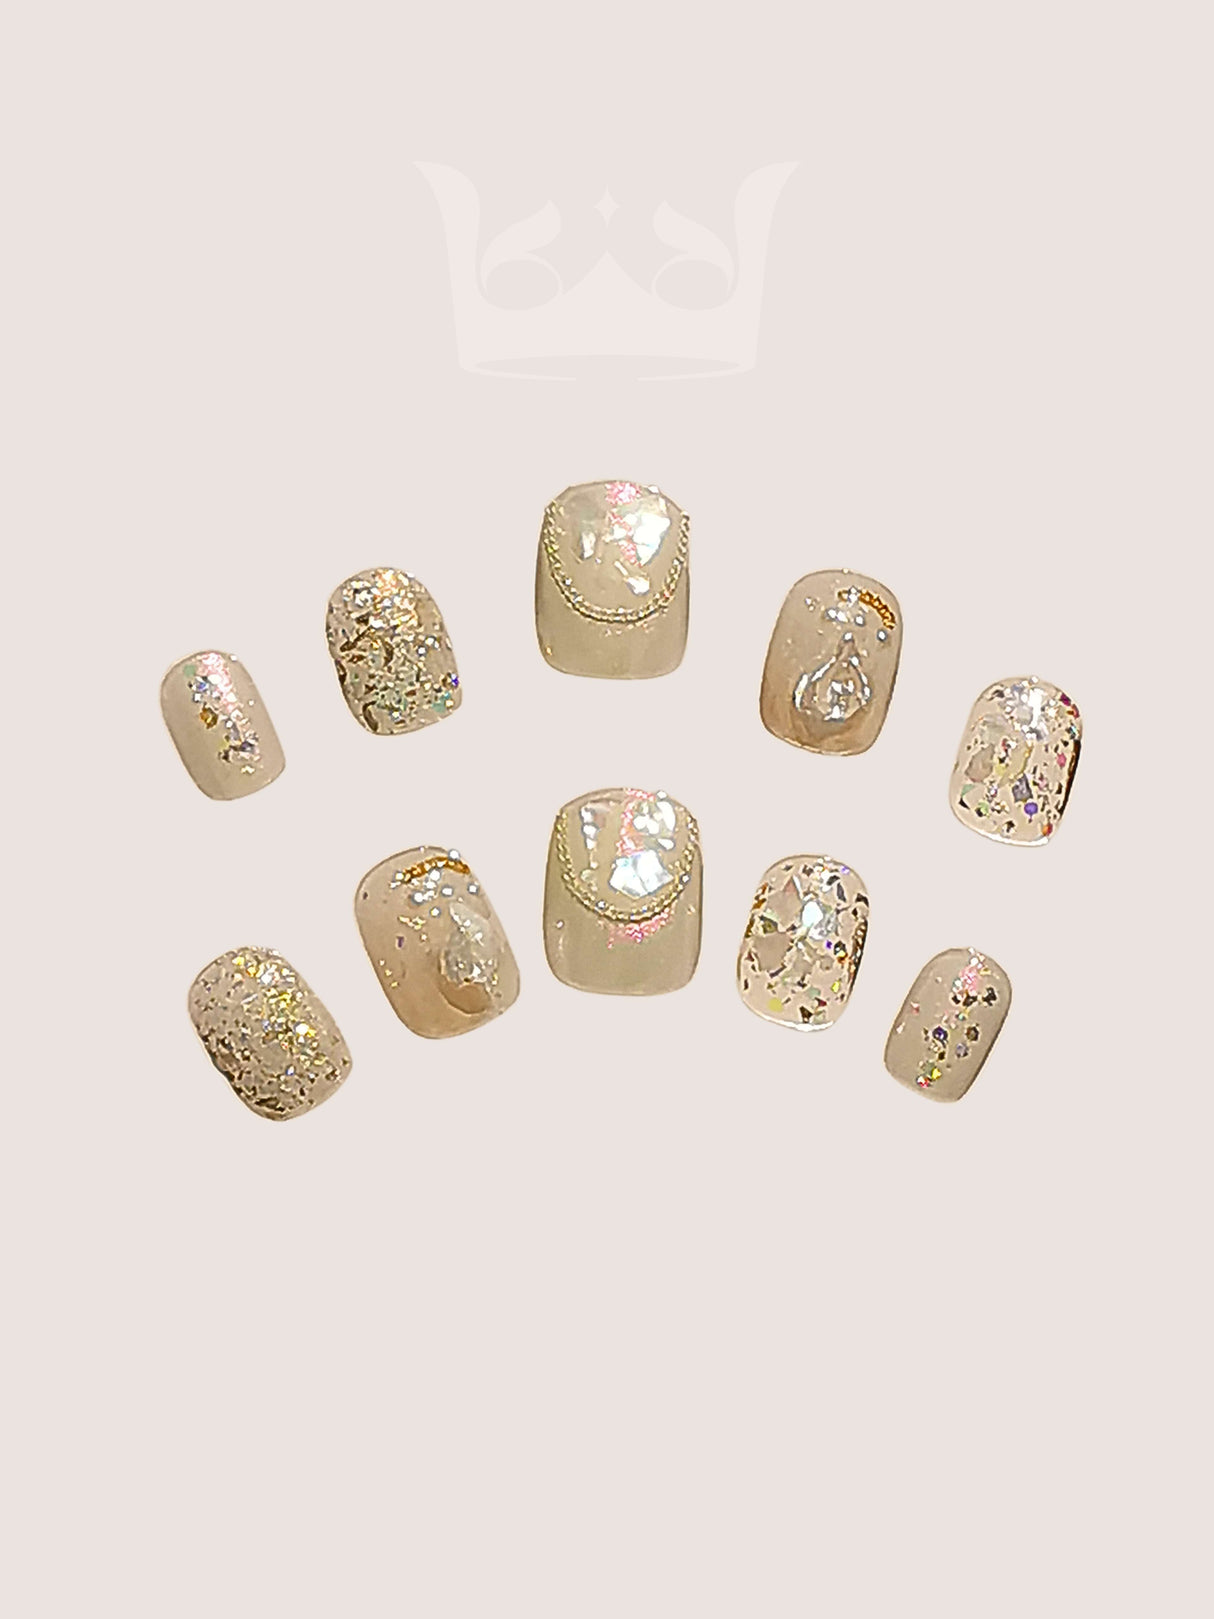 Glittery and sparkly nails with irregularly shaped flakes and warm-toned colors are perfect for special occasions, creating a luxurious and festive look.